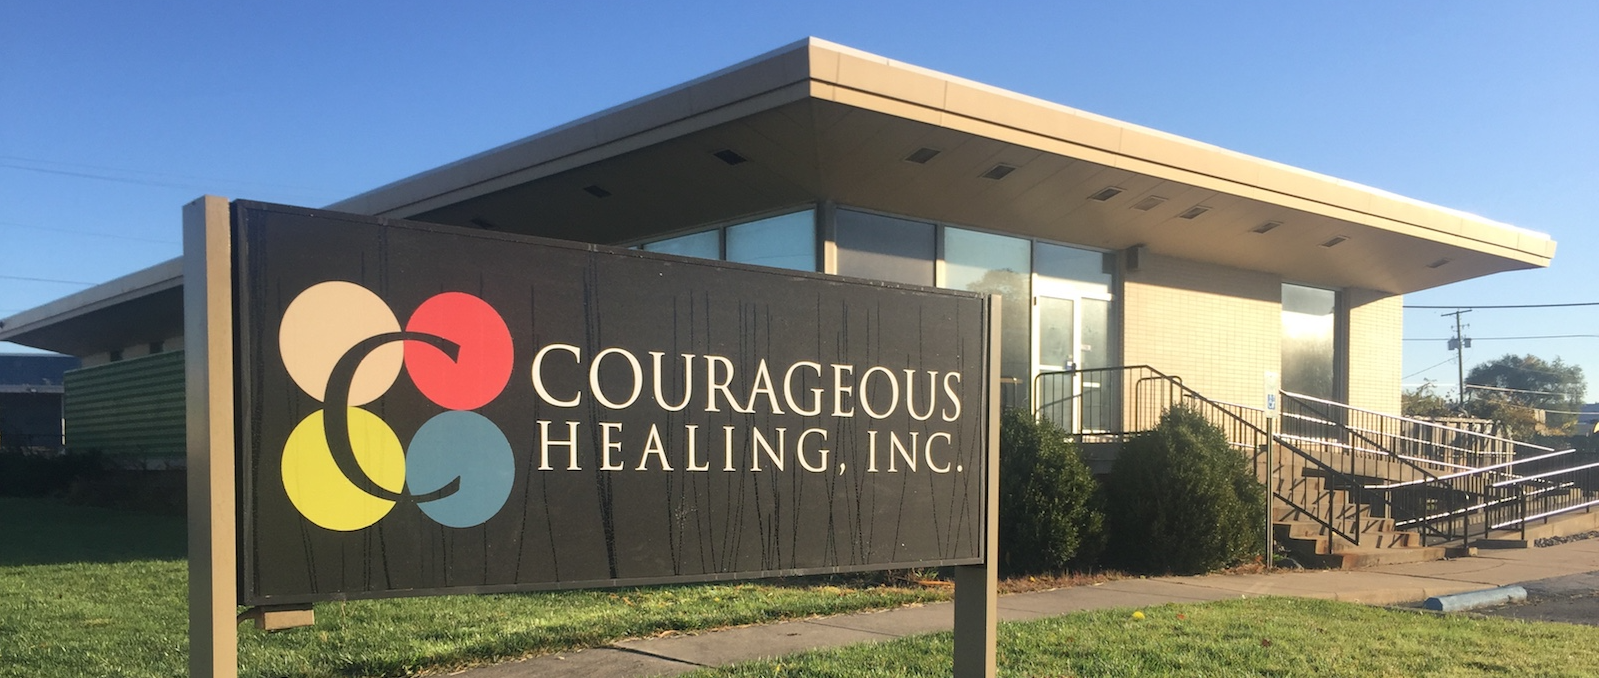 Courageous Healing, Inc., is opening its first location in Fort Wayne at 2013 S. Anthony Blvd.